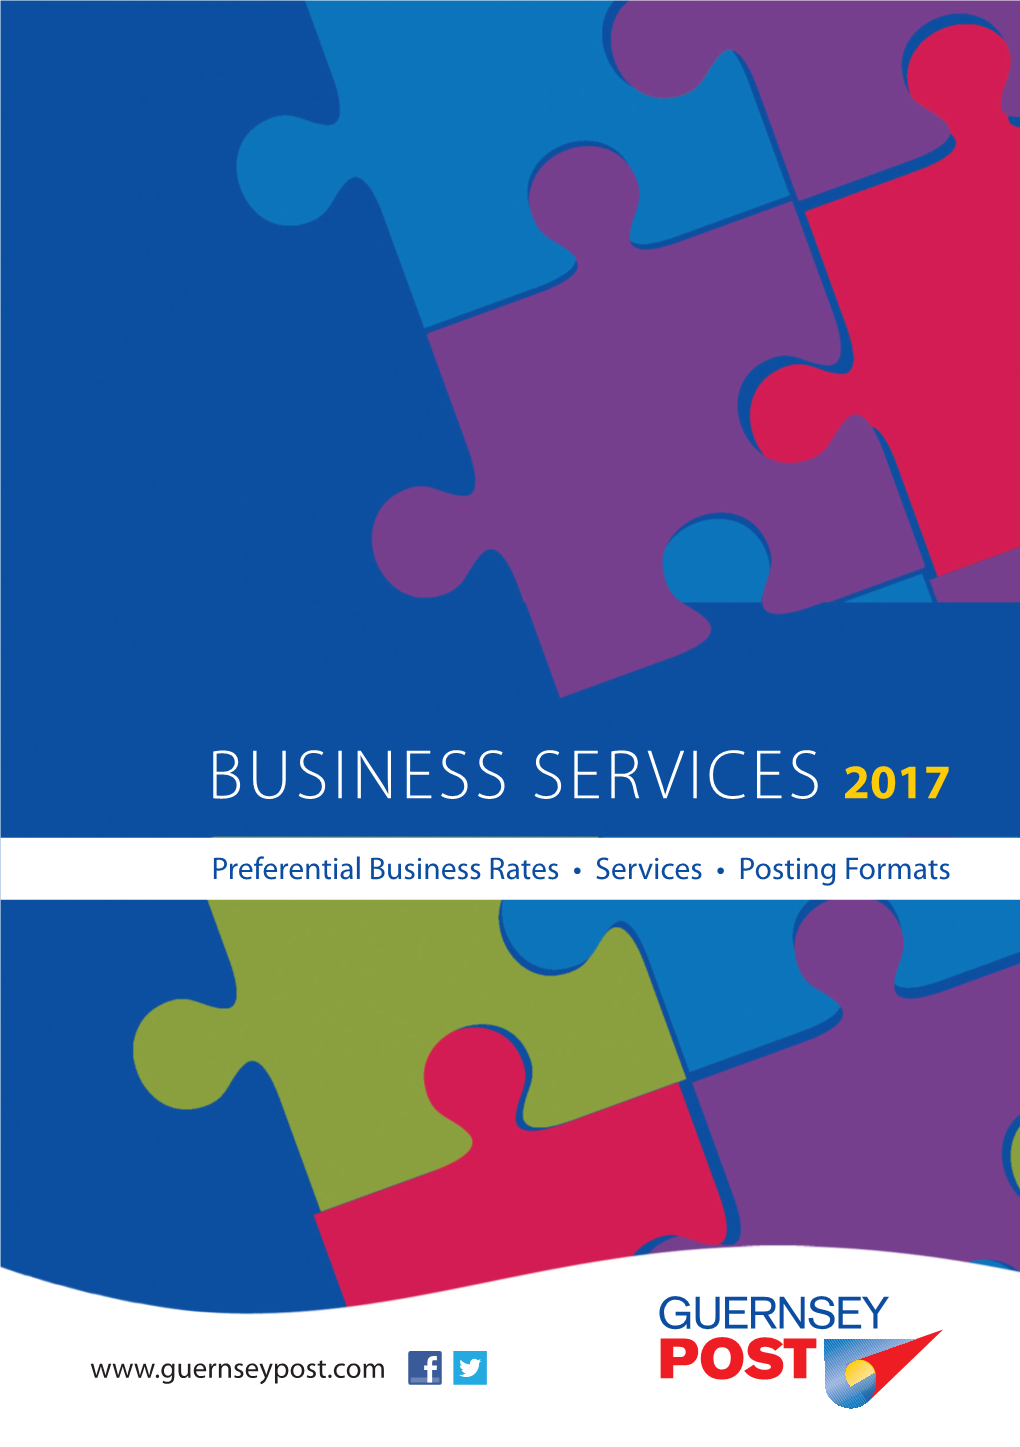 Business Services 2017